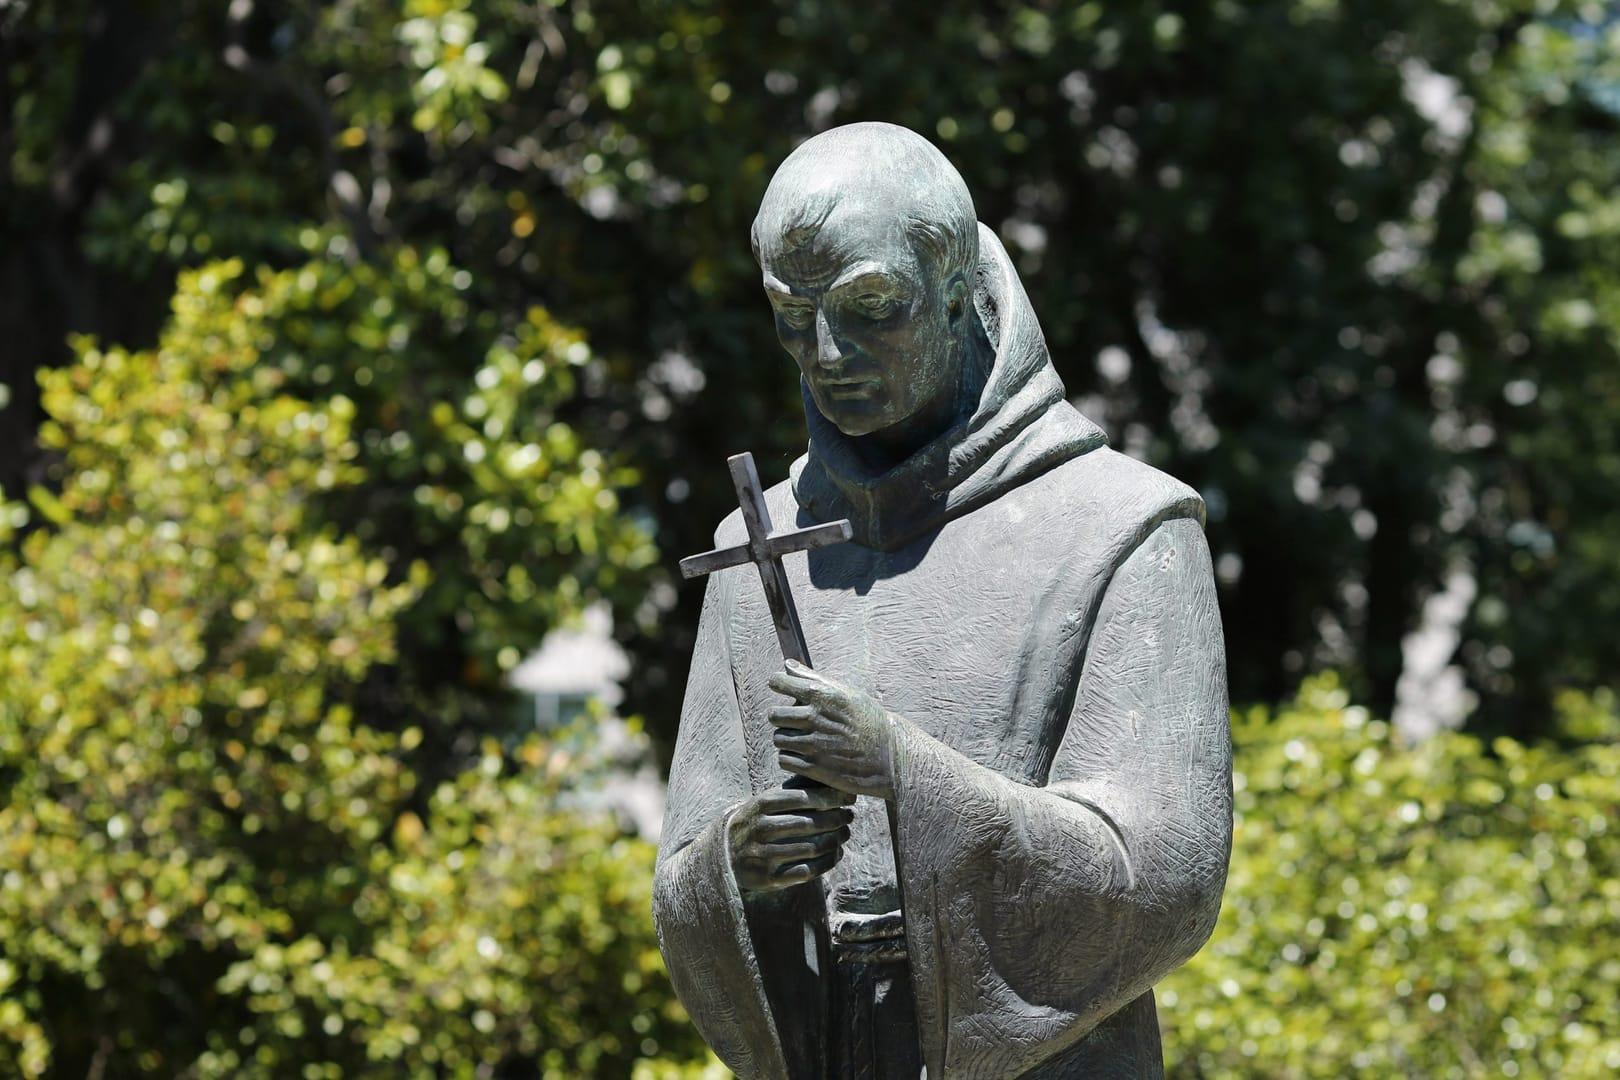 After being removed from City Hall, Serra statue welcomed at mission church